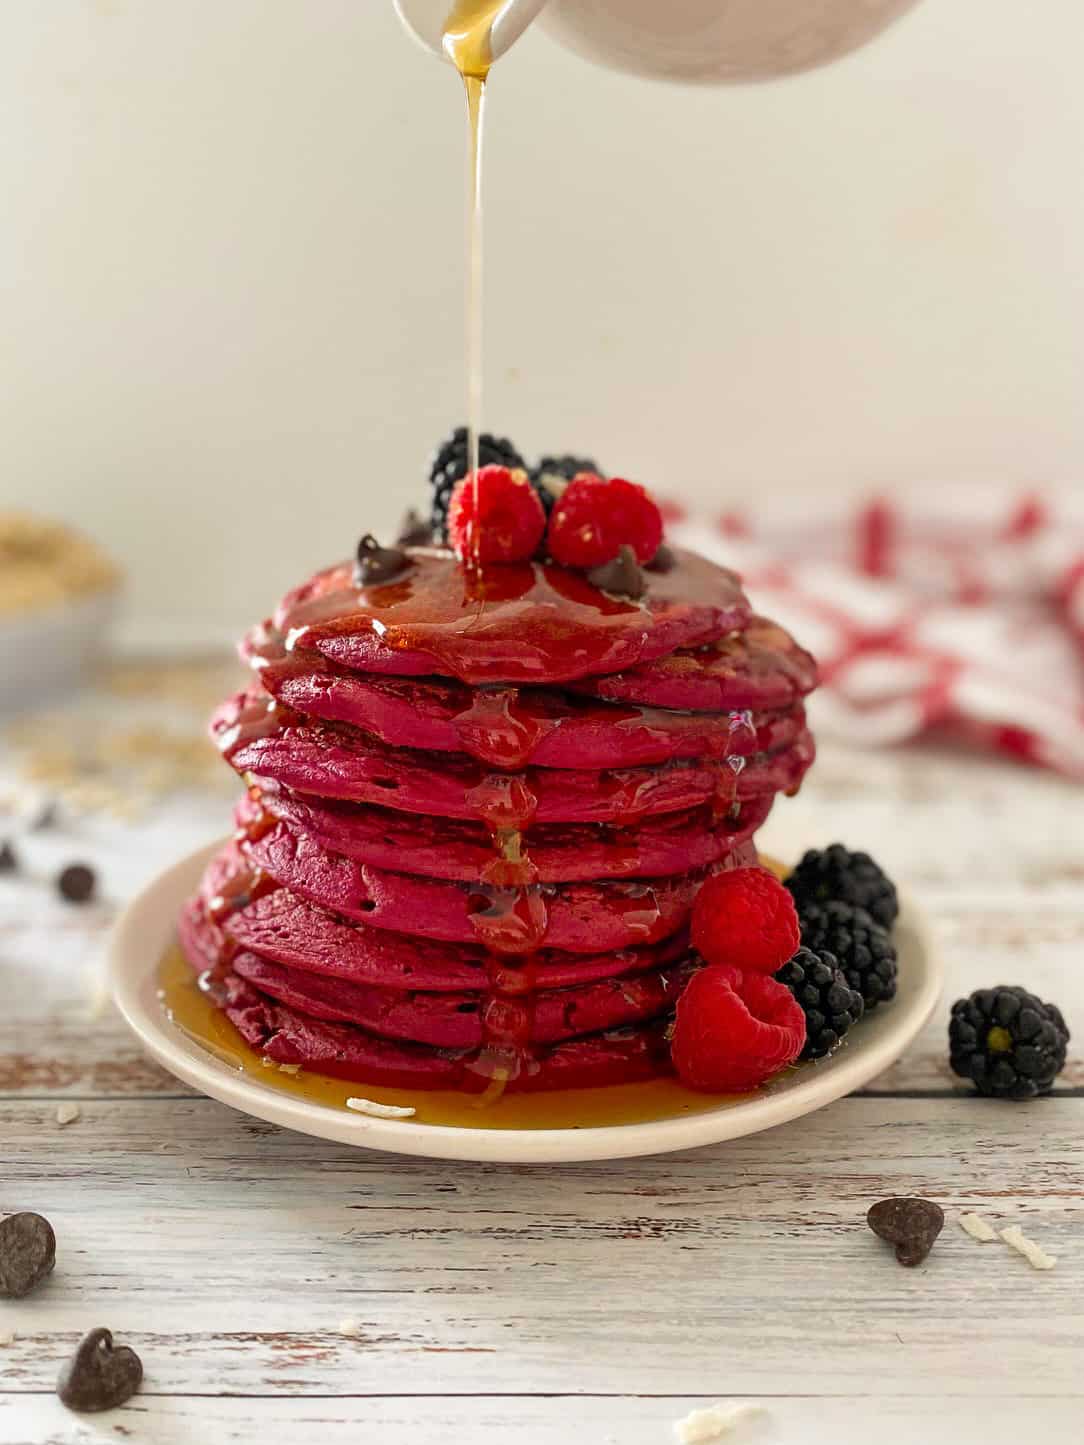 pink pancakes stacked on white plate with syrup dripping down them.